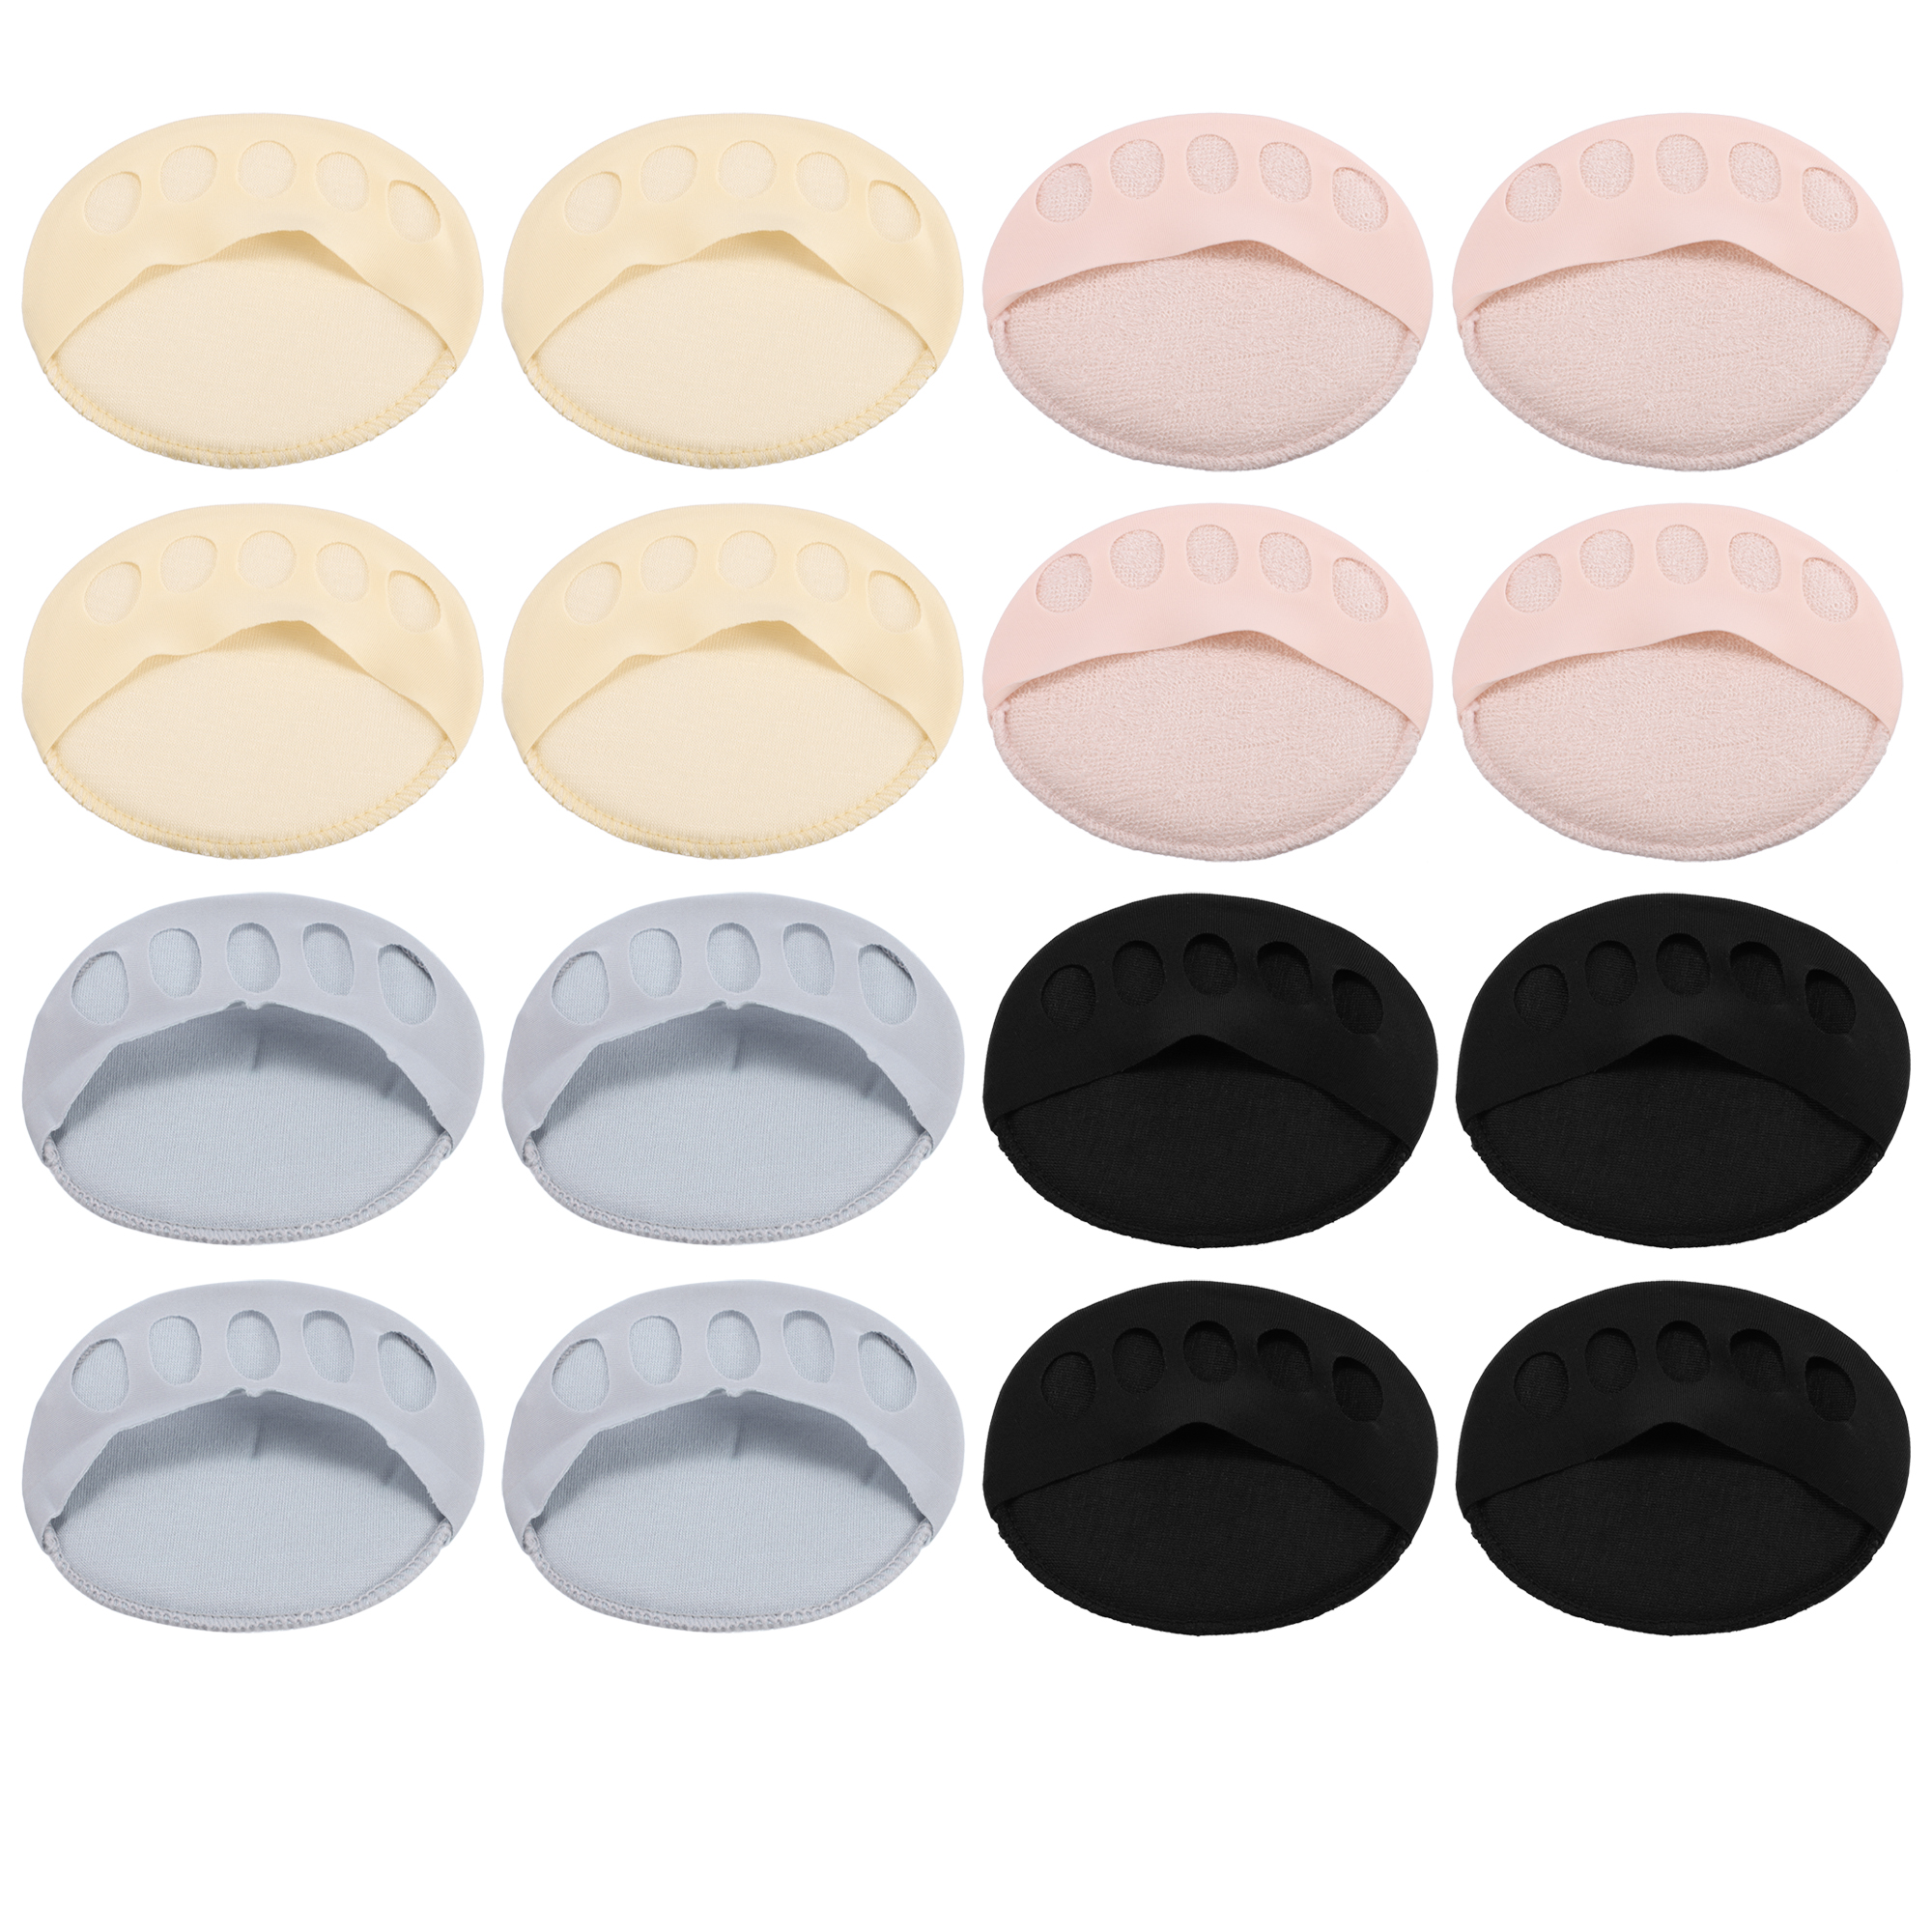 Unique Bargains 8 Pairs Forefoot Pads Five Toes Forefoot Pads Black Pink Gray Beige